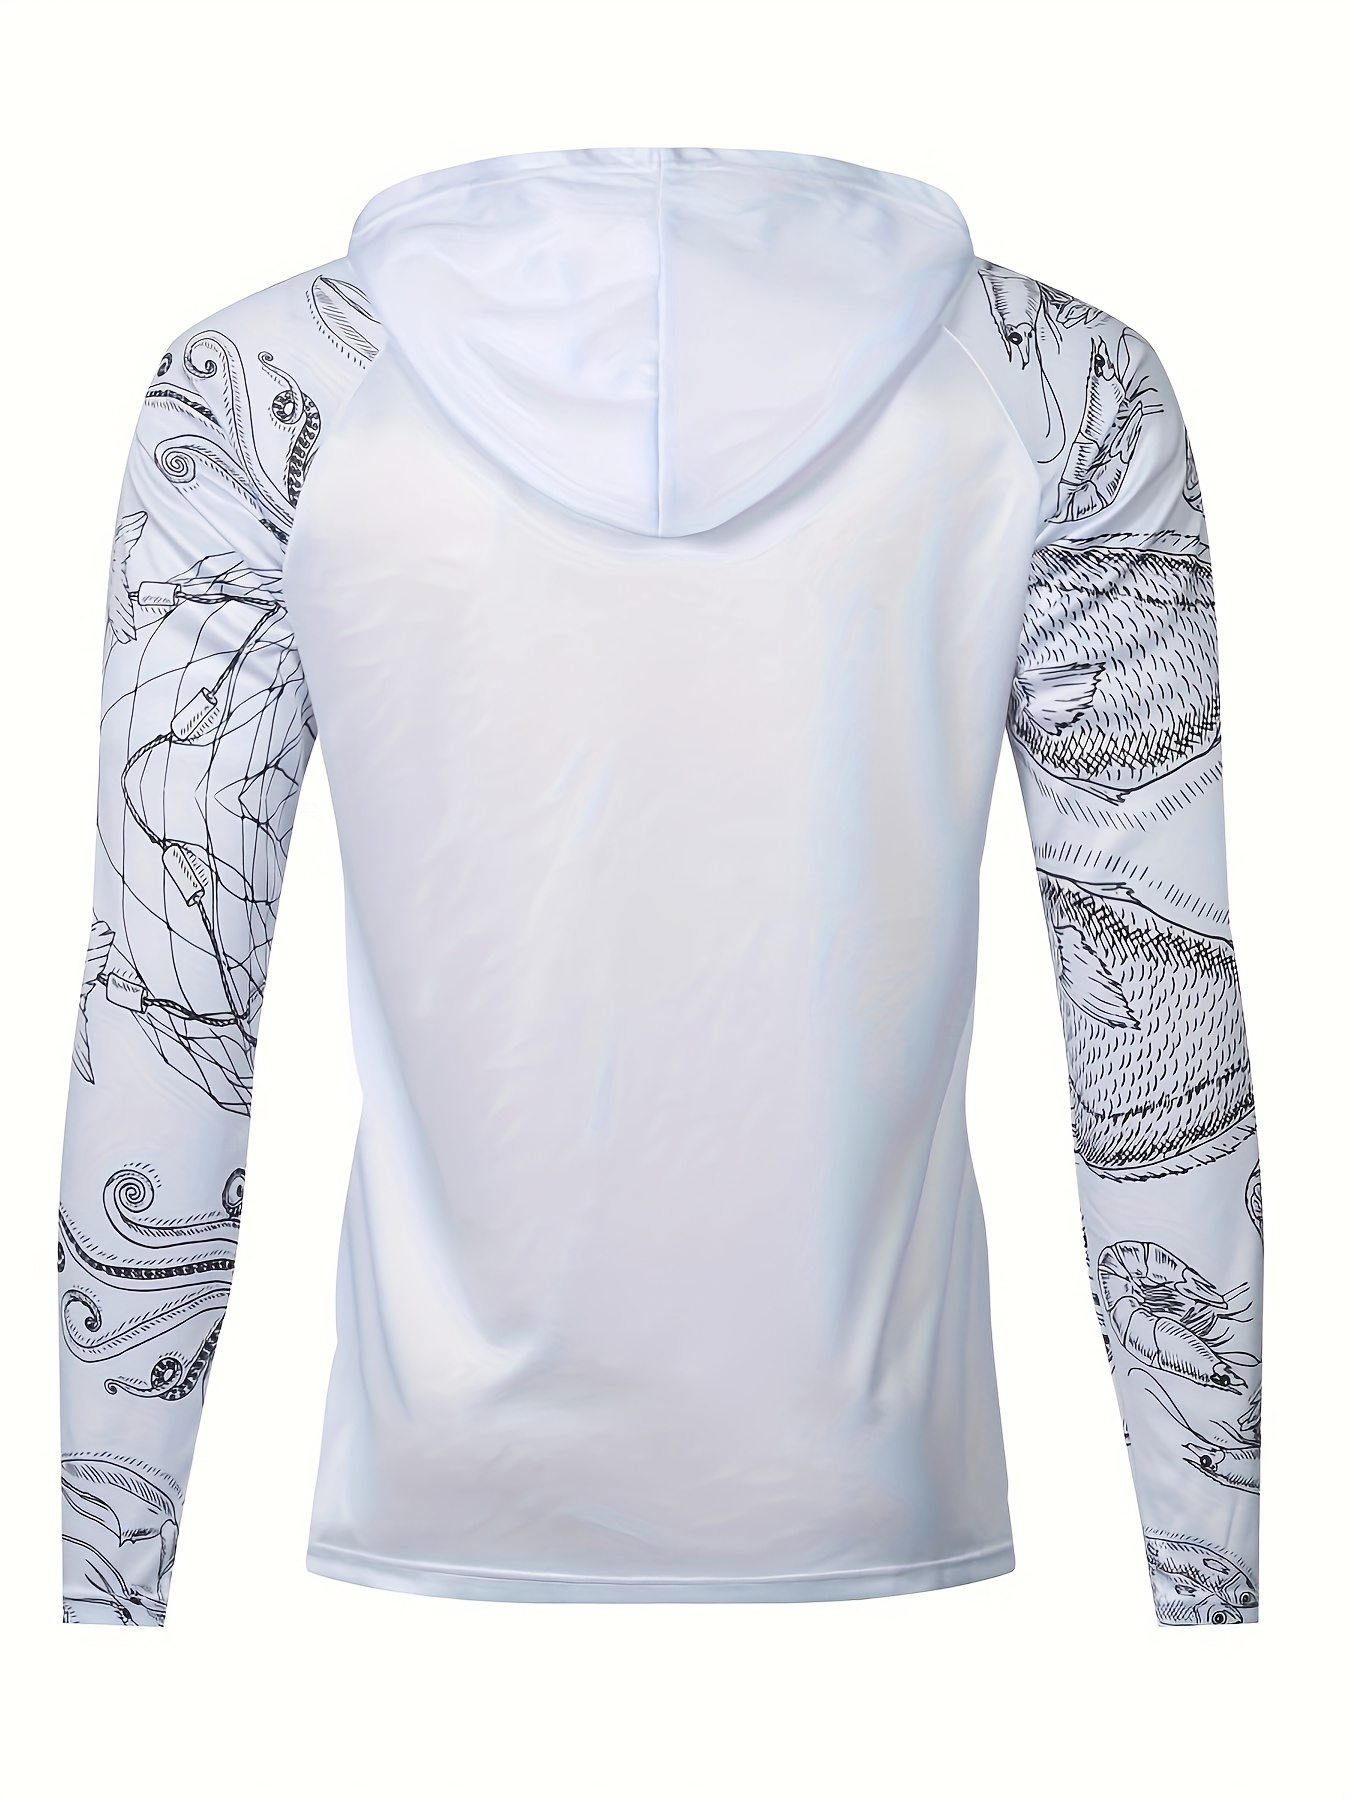 Men's Raglan Sleeve With Fish Pattern Hoodie, Anti-uv Sunscreen Sun Protection Fishing Shirt Breathable Quick Dry Hooded Fishing Jersey For